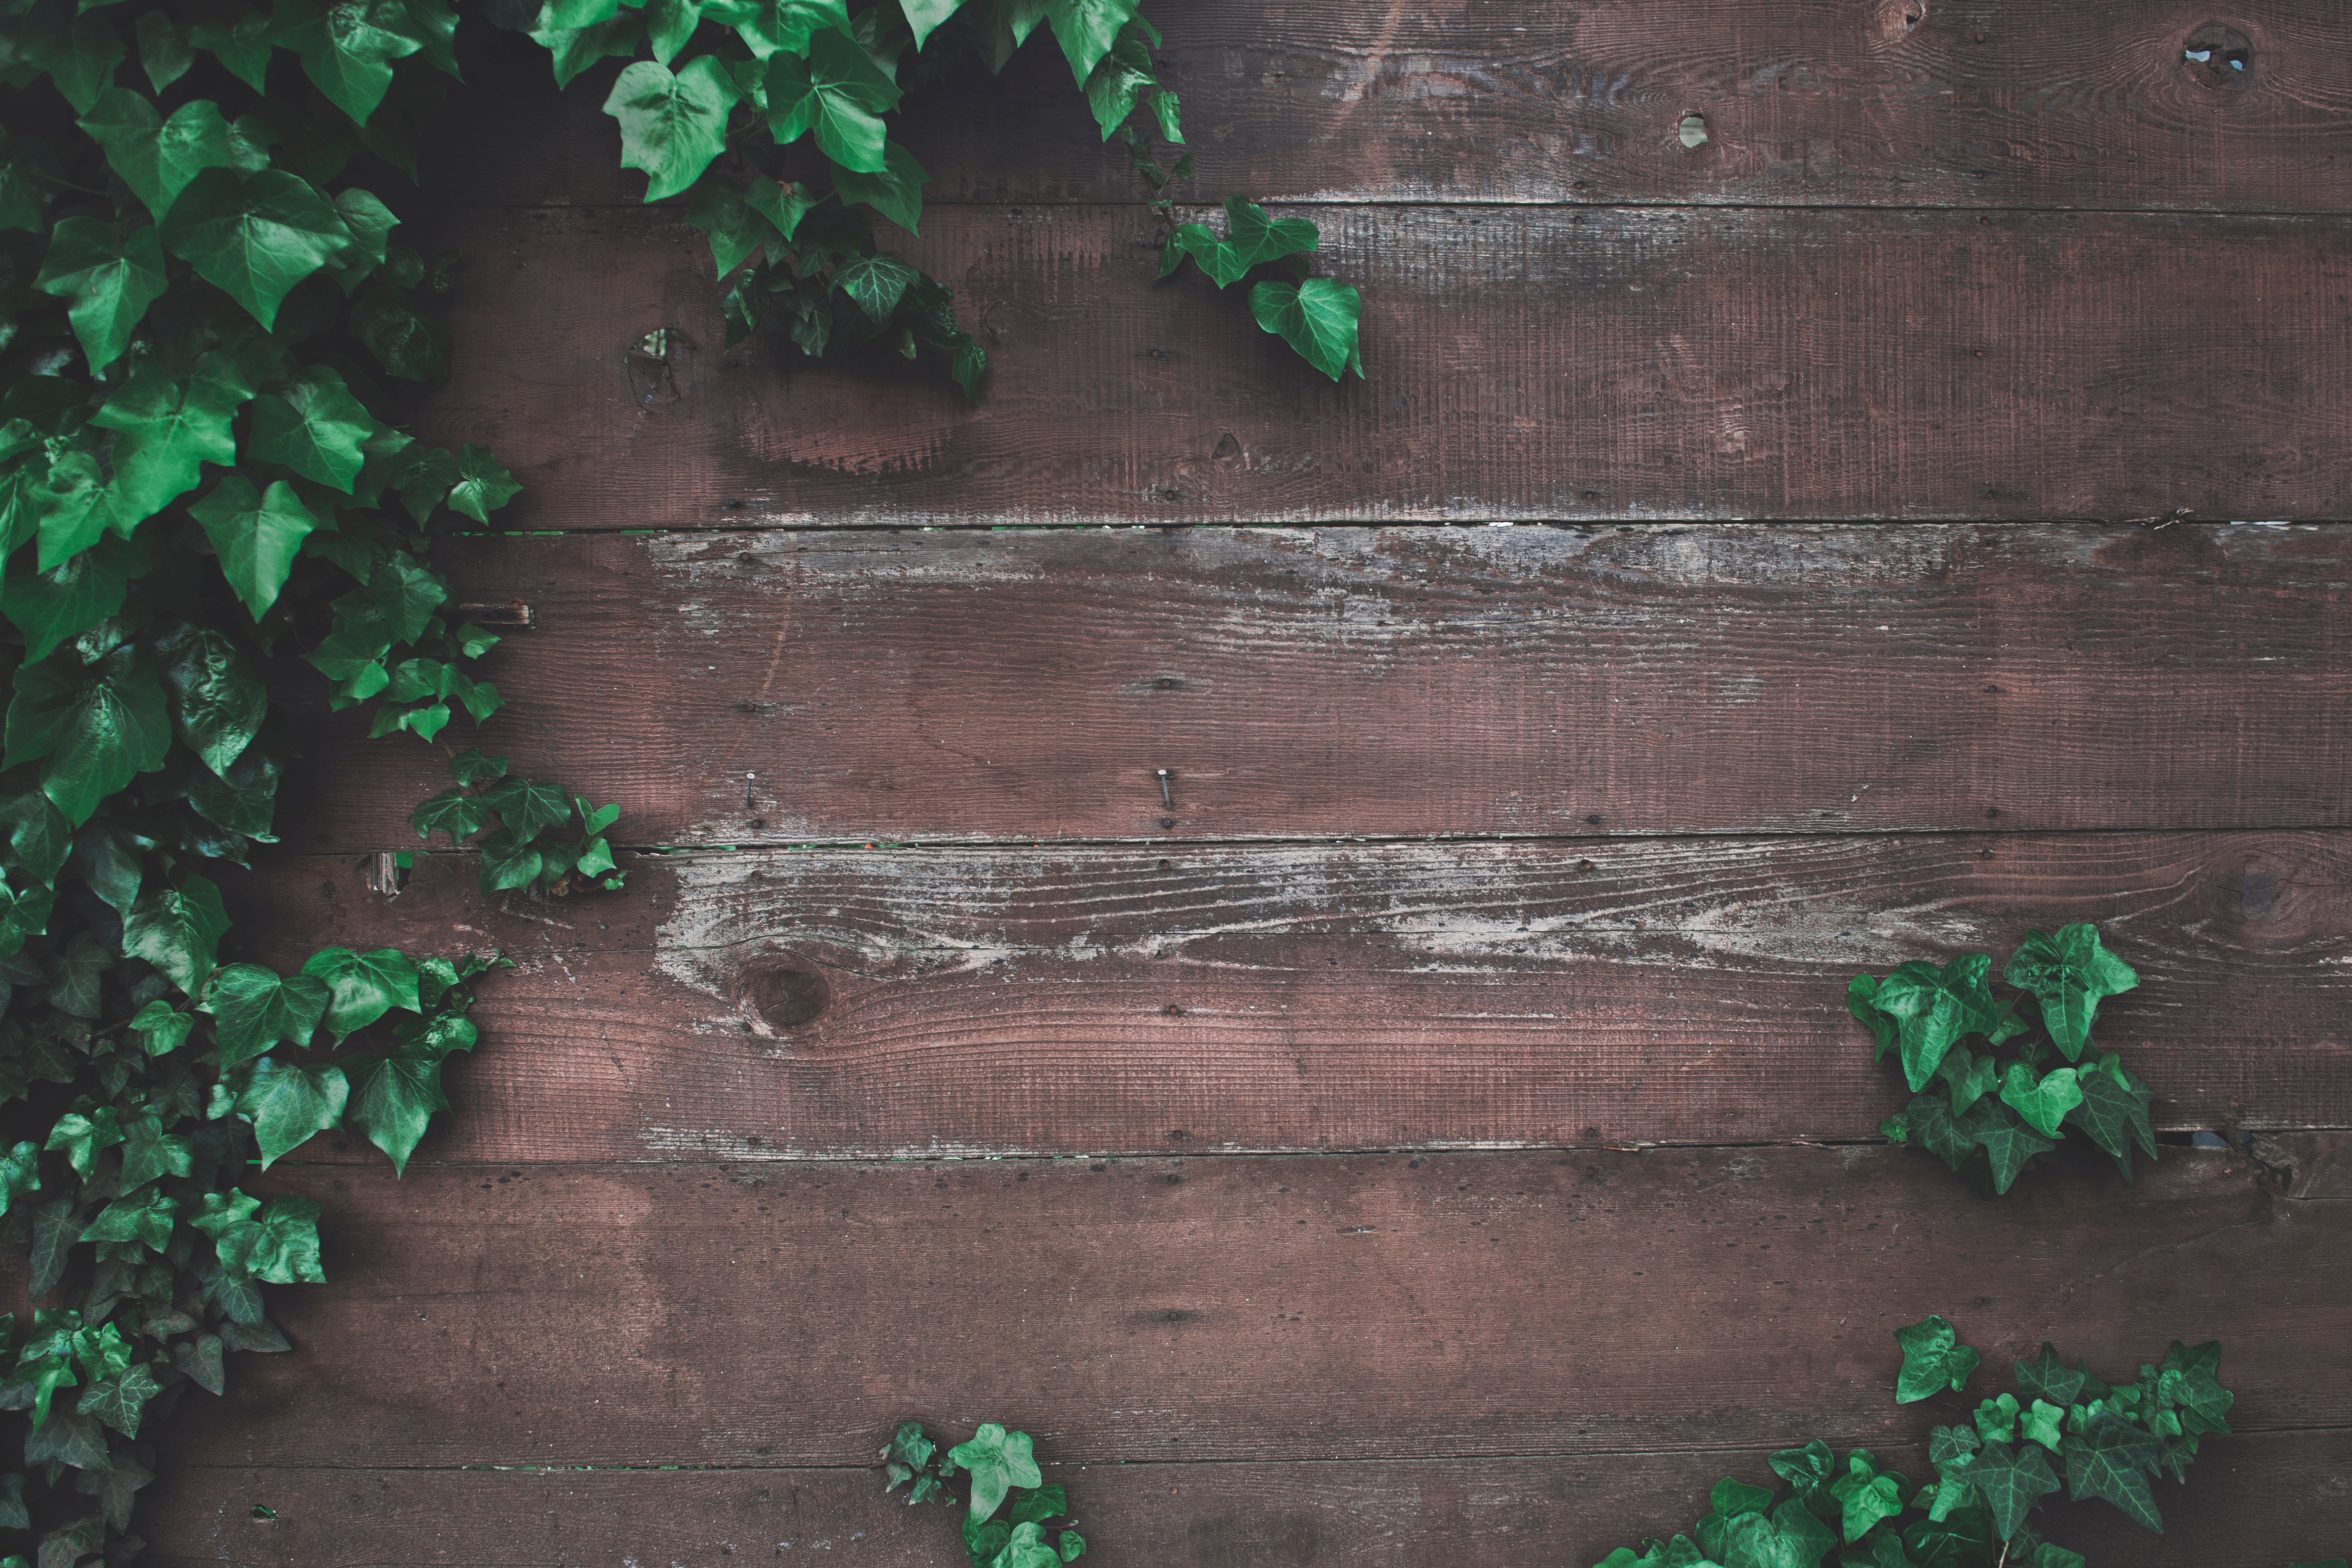 7200x4800 creeper, greenery, wood, wall, garden, ivy, table, nature, plant, PNG image, leafe, outdoors, weathered, leaves, plank, fence, texture, background Gallery HD Wallpaper